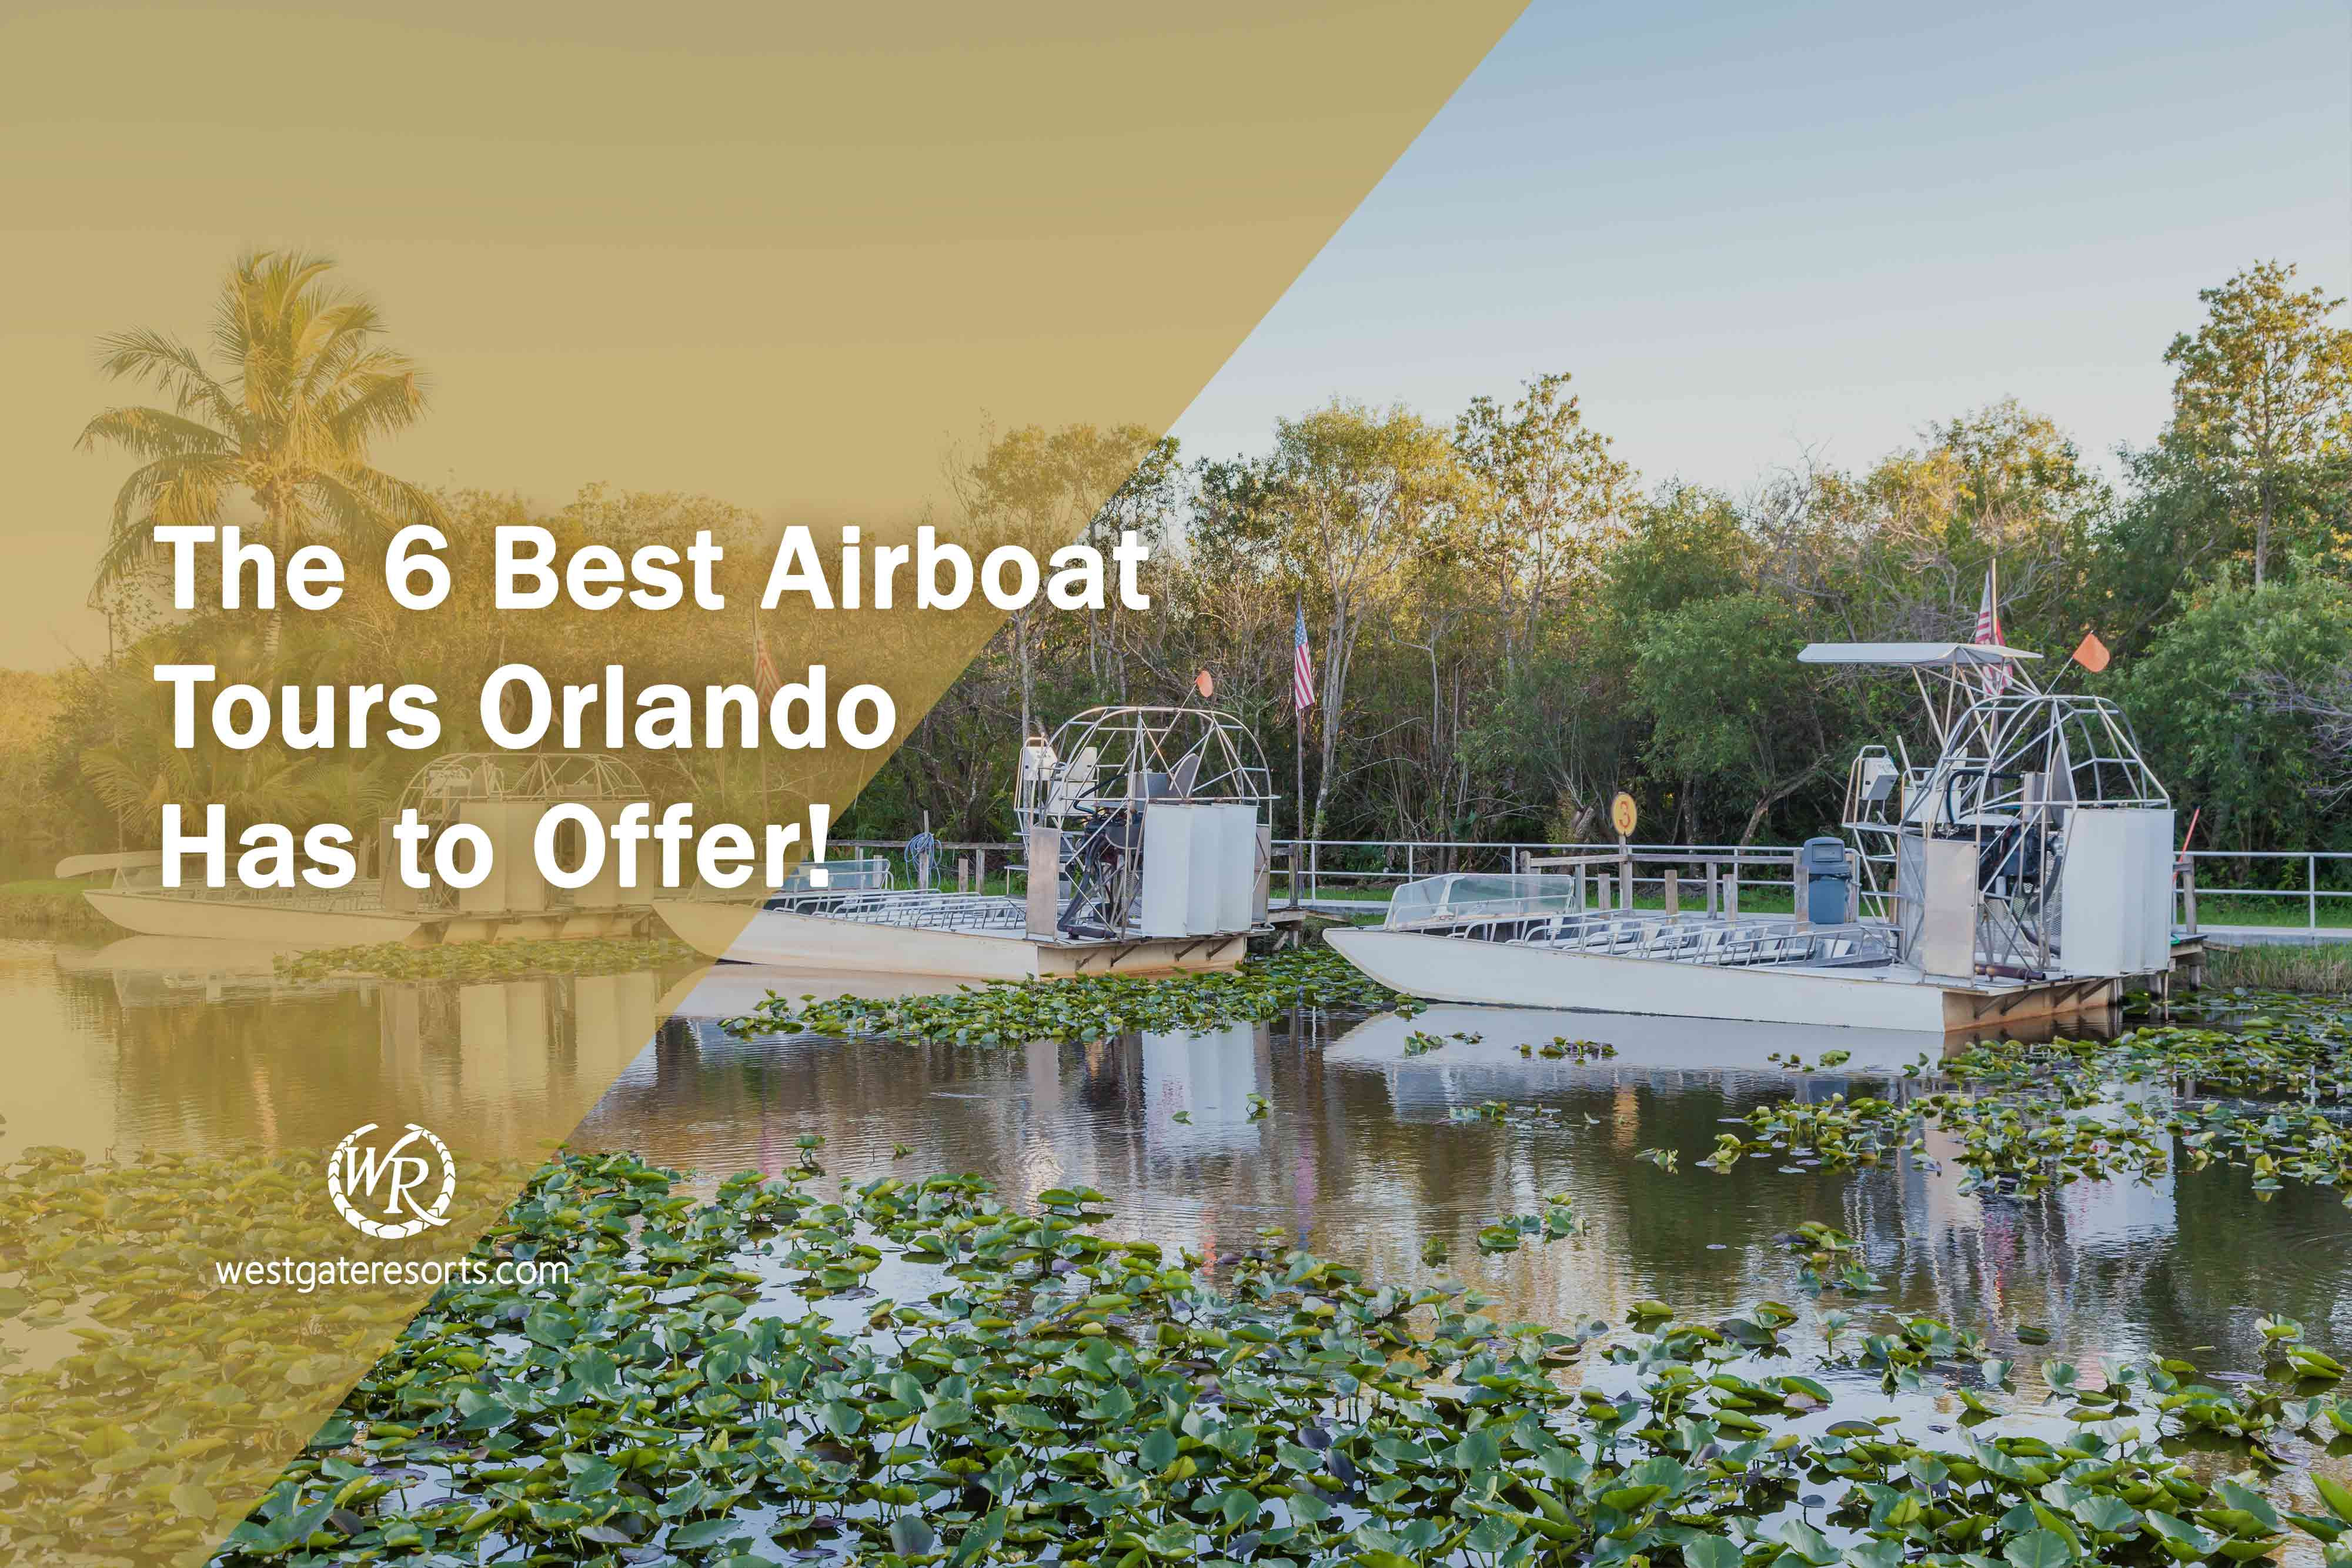 The 6 Best Airboat Tours Orlando Has to Offer!